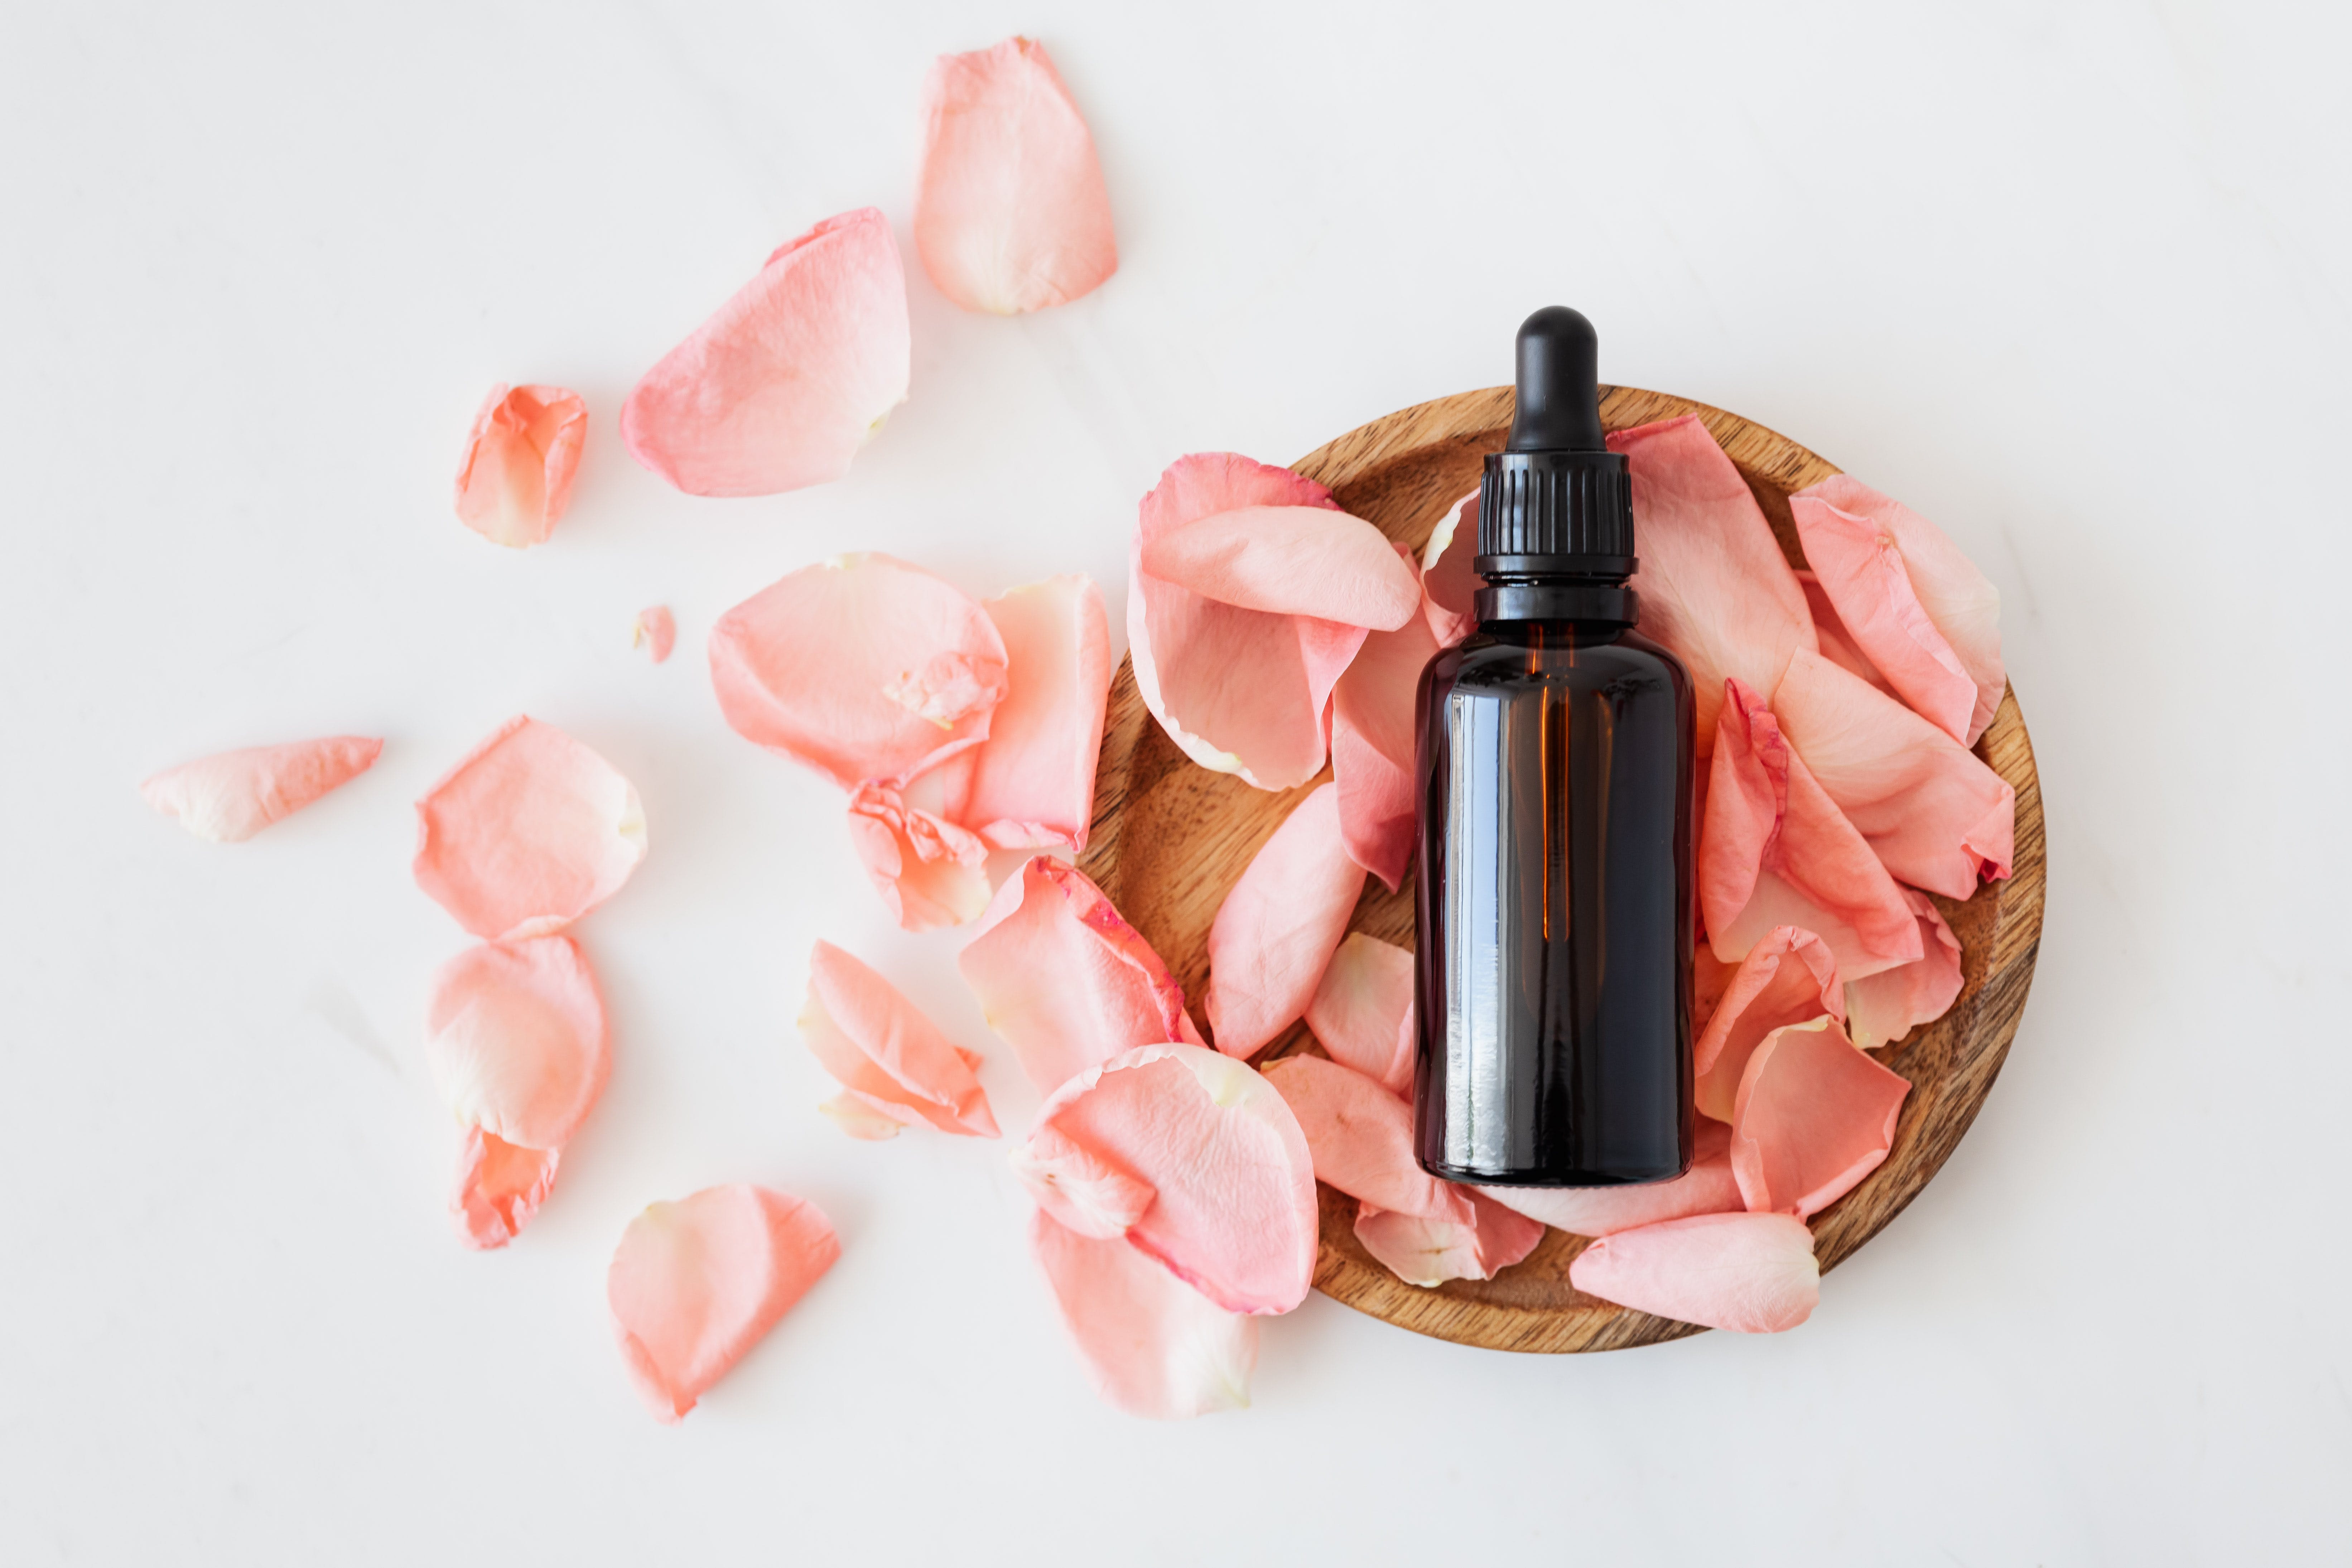 Essential oil bottle on wooden plate surrounded by pink rose petals against white background